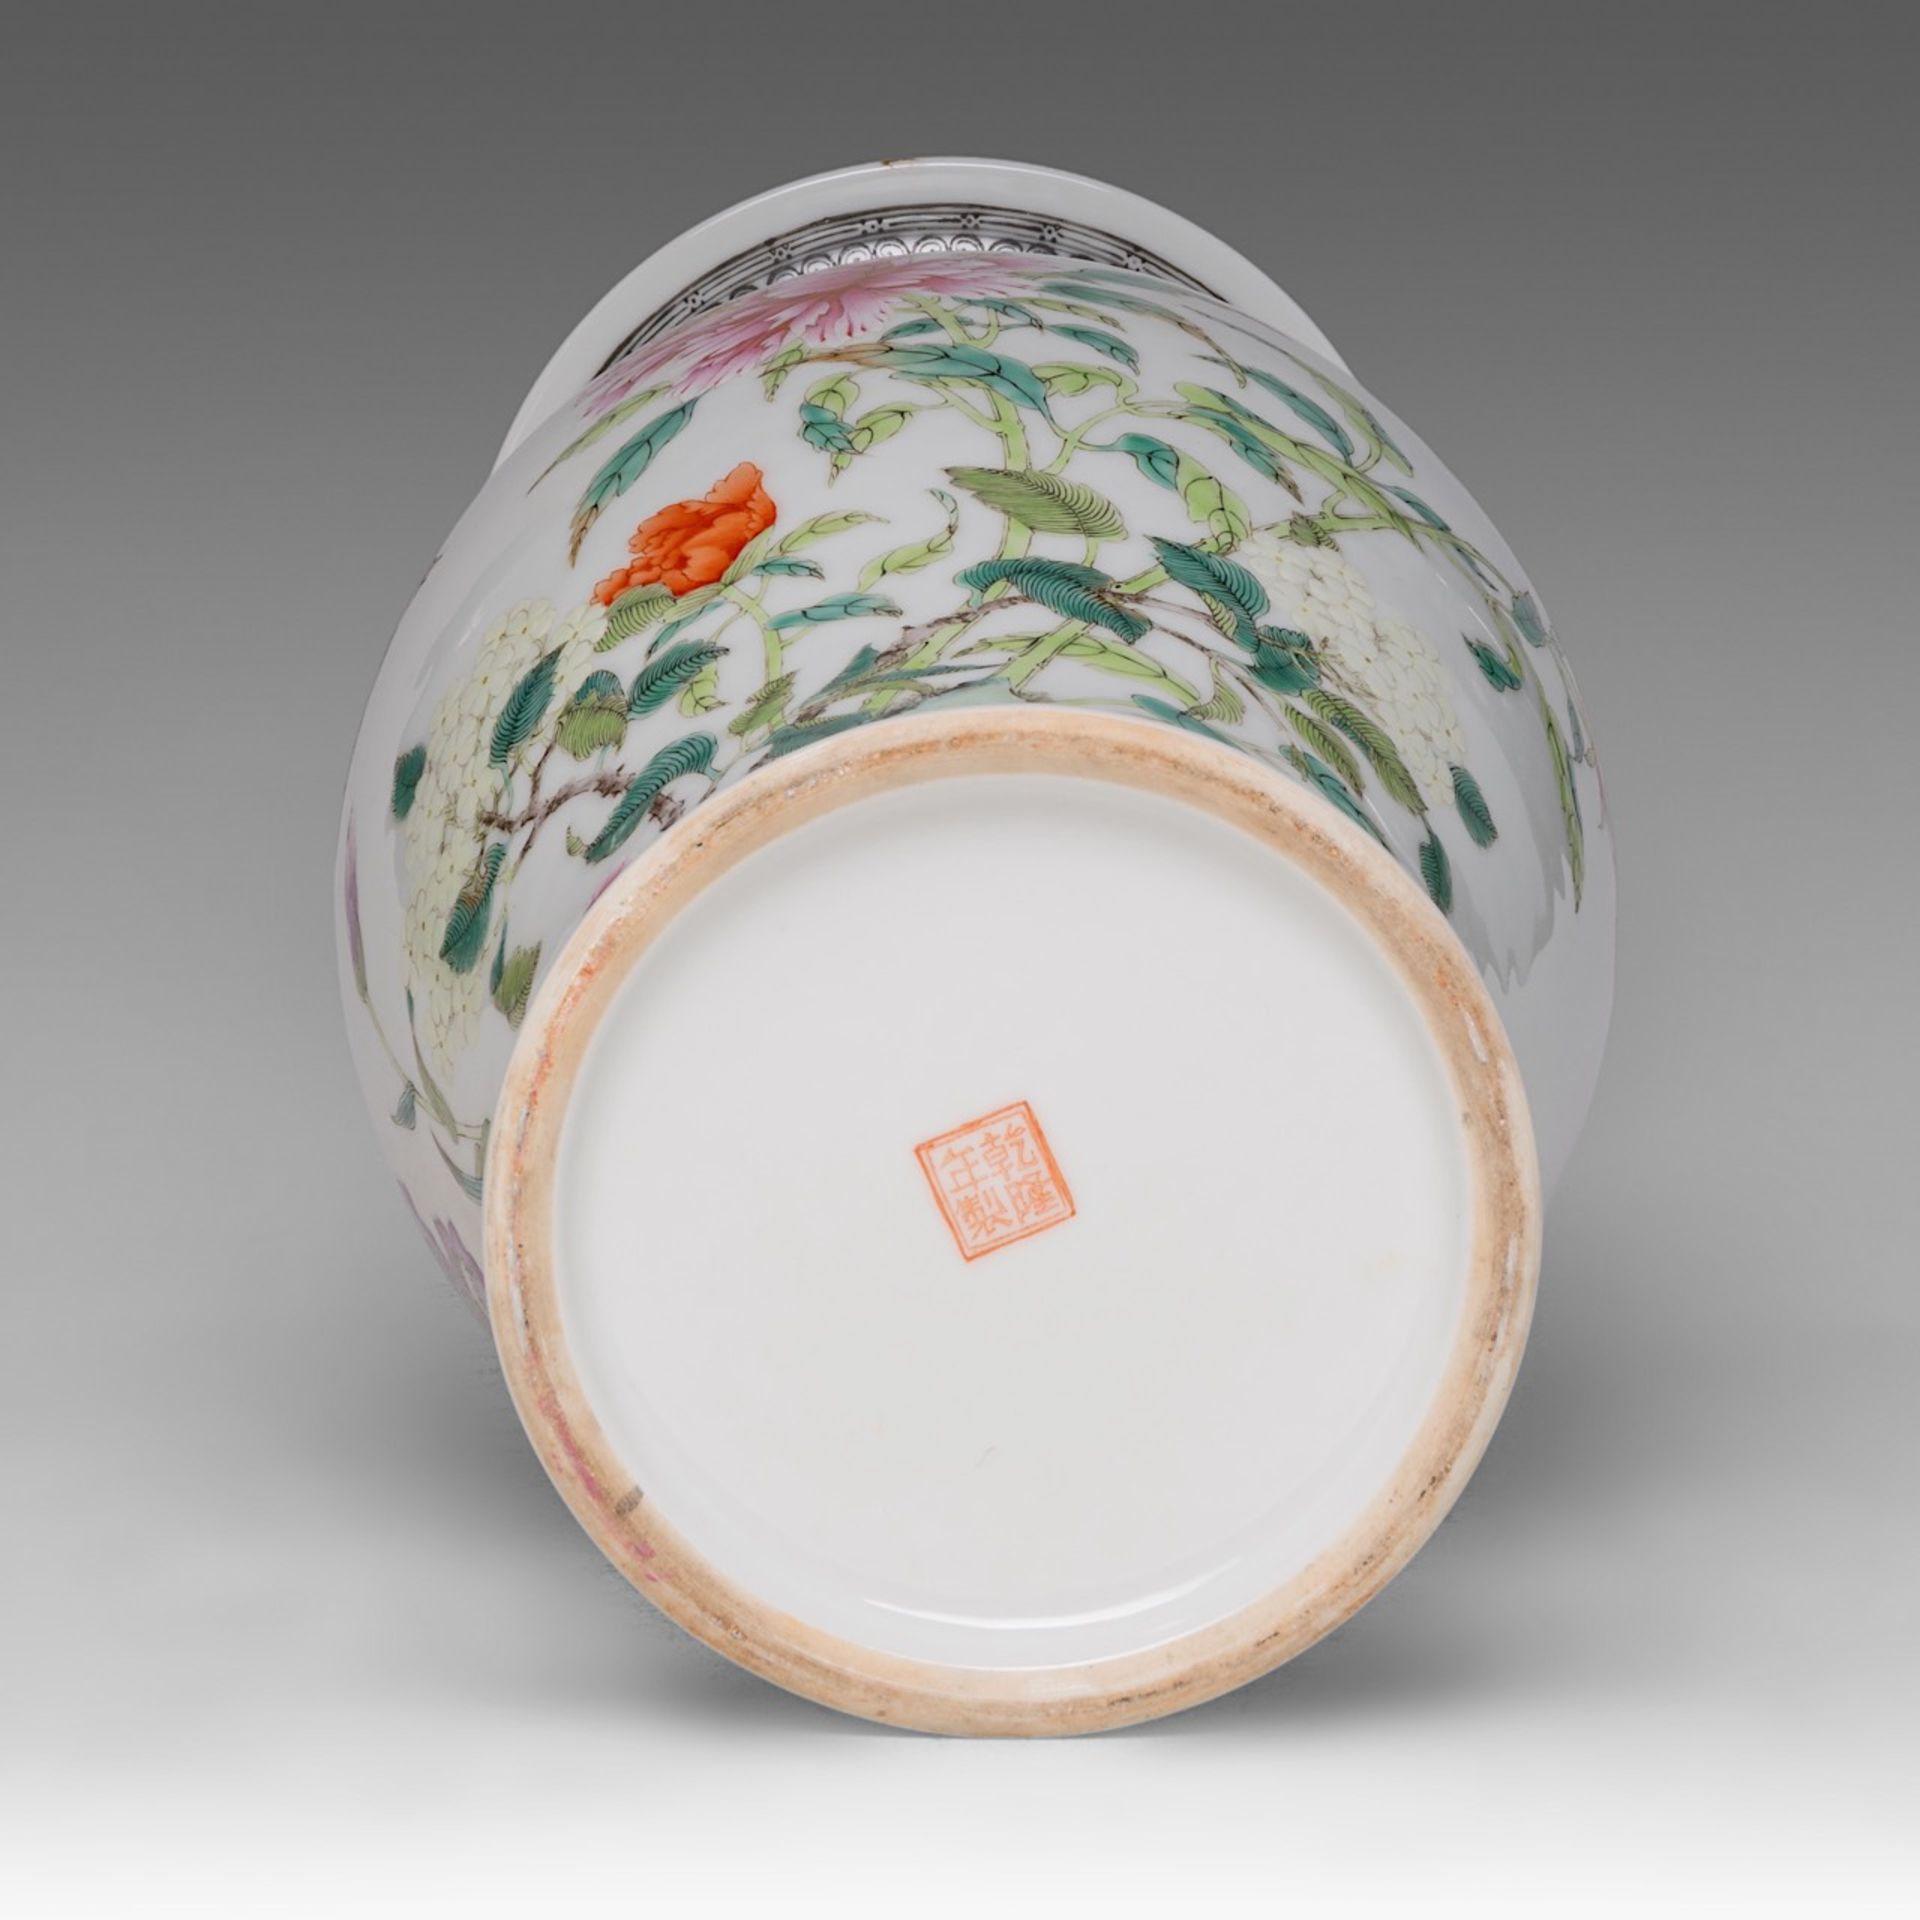 A Chinese famille rose 'Magpies in a Lotus Garden' vase, the back with a signed text, 20thC, H 41,3 - Image 6 of 6